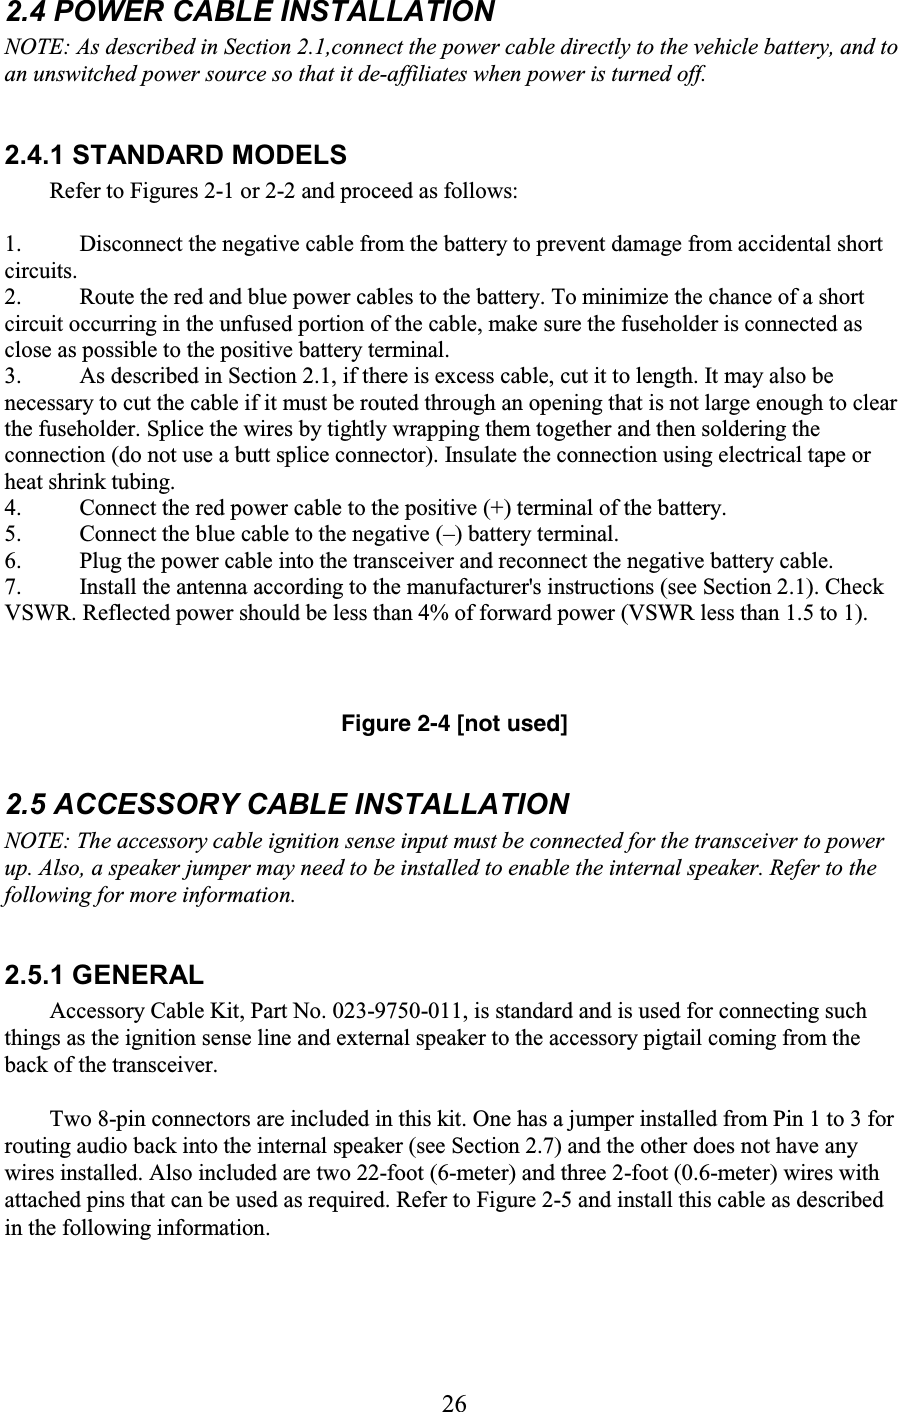 26 2.4 POWER CABLE INSTALLATION  NOTE: As described in Section 2.1,connect the power cable directly to the vehicle battery, and to an unswitched power source so that it de-affiliates when power is turned off.  2.4.1 STANDARD MODELS  Refer to Figures 2-1 or 2-2 and proceed as follows:  1. Disconnect the negative cable from the battery to prevent damage from accidental short circuits.  2. Route the red and blue power cables to the battery. To minimize the chance of a short circuit occurring in the unfused portion of the cable, make sure the fuseholder is connected as close as possible to the positive battery terminal.  3. As described in Section 2.1, if there is excess cable, cut it to length. It may also be necessary to cut the cable if it must be routed through an opening that is not large enough to clear the fuseholder. Splice the wires by tightly wrapping them together and then soldering the connection (do not use a butt splice connector). Insulate the connection using electrical tape or heat shrink tubing.  4. Connect the red power cable to the positive (+) terminal of the battery.  5. Connect the blue cable to the negative (–) battery terminal.  6. Plug the power cable into the transceiver and reconnect the negative battery cable.  7. Install the antenna according to the manufacturer&apos;s instructions (see Section 2.1). Check VSWR. Reflected power should be less than 4% of forward power (VSWR less than 1.5 to 1).     Figure 2-4 [not used]  2.5 ACCESSORY CABLE INSTALLATION  NOTE: The accessory cable ignition sense input must be connected for the transceiver to power up. Also, a speaker jumper may need to be installed to enable the internal speaker. Refer to the following for more information.  2.5.1 GENERAL  Accessory Cable Kit, Part No. 023-9750-011, is standard and is used for connecting such things as the ignition sense line and external speaker to the accessory pigtail coming from the back of the transceiver.  Two 8-pin connectors are included in this kit. One has a jumper installed from Pin 1 to 3 for routing audio back into the internal speaker (see Section 2.7) and the other does not have any wires installed. Also included are two 22-foot (6-meter) and three 2-foot (0.6-meter) wires with attached pins that can be used as required. Refer to Figure 2-5 and install this cable as described in the following information.  